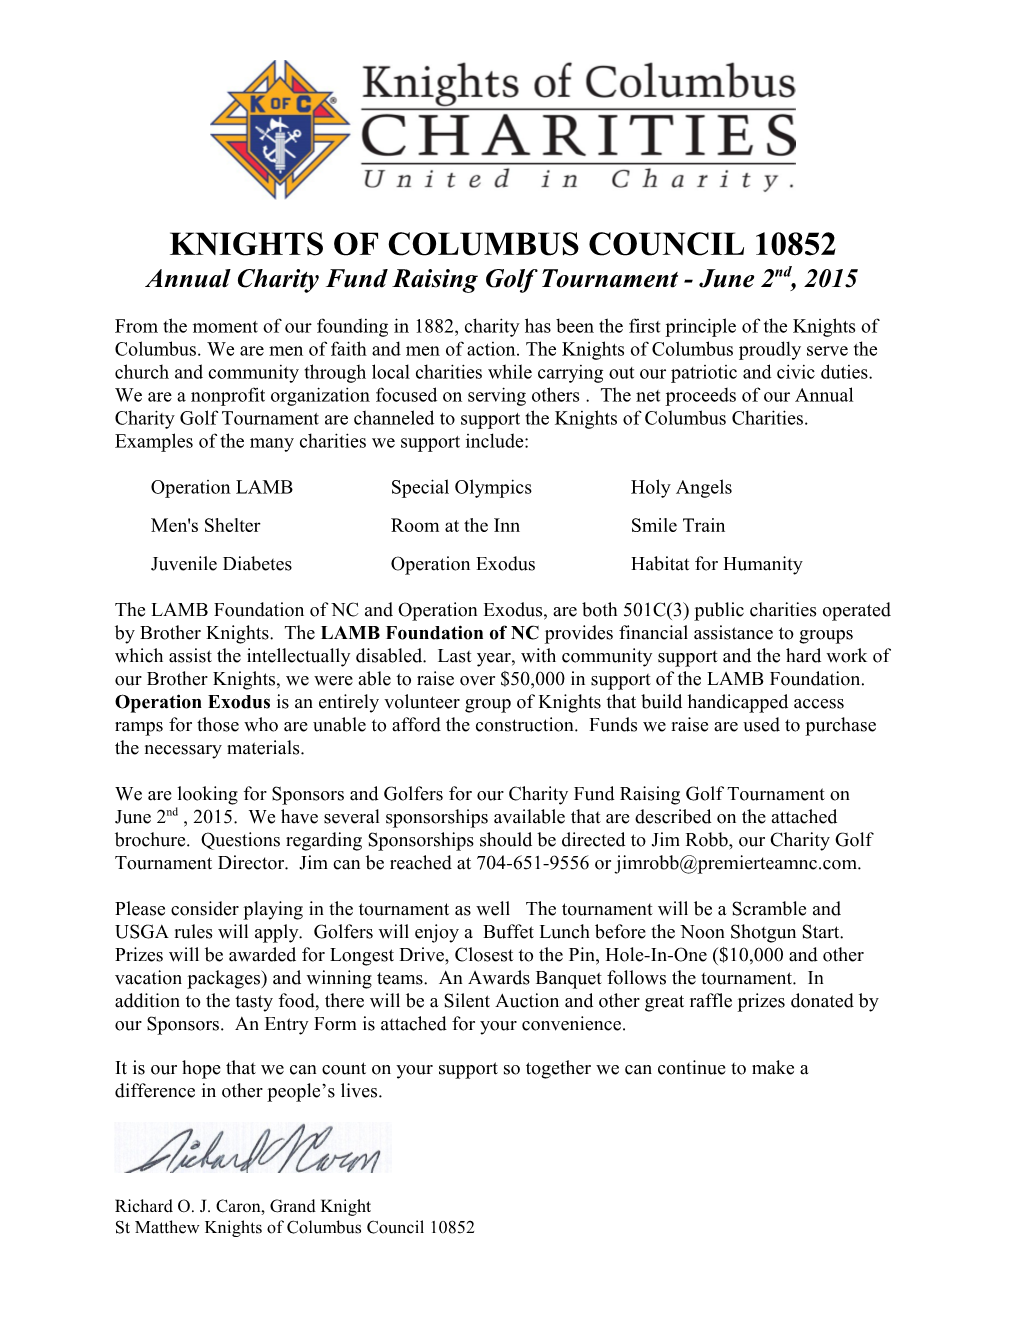 Knights of Columbus Council 10852